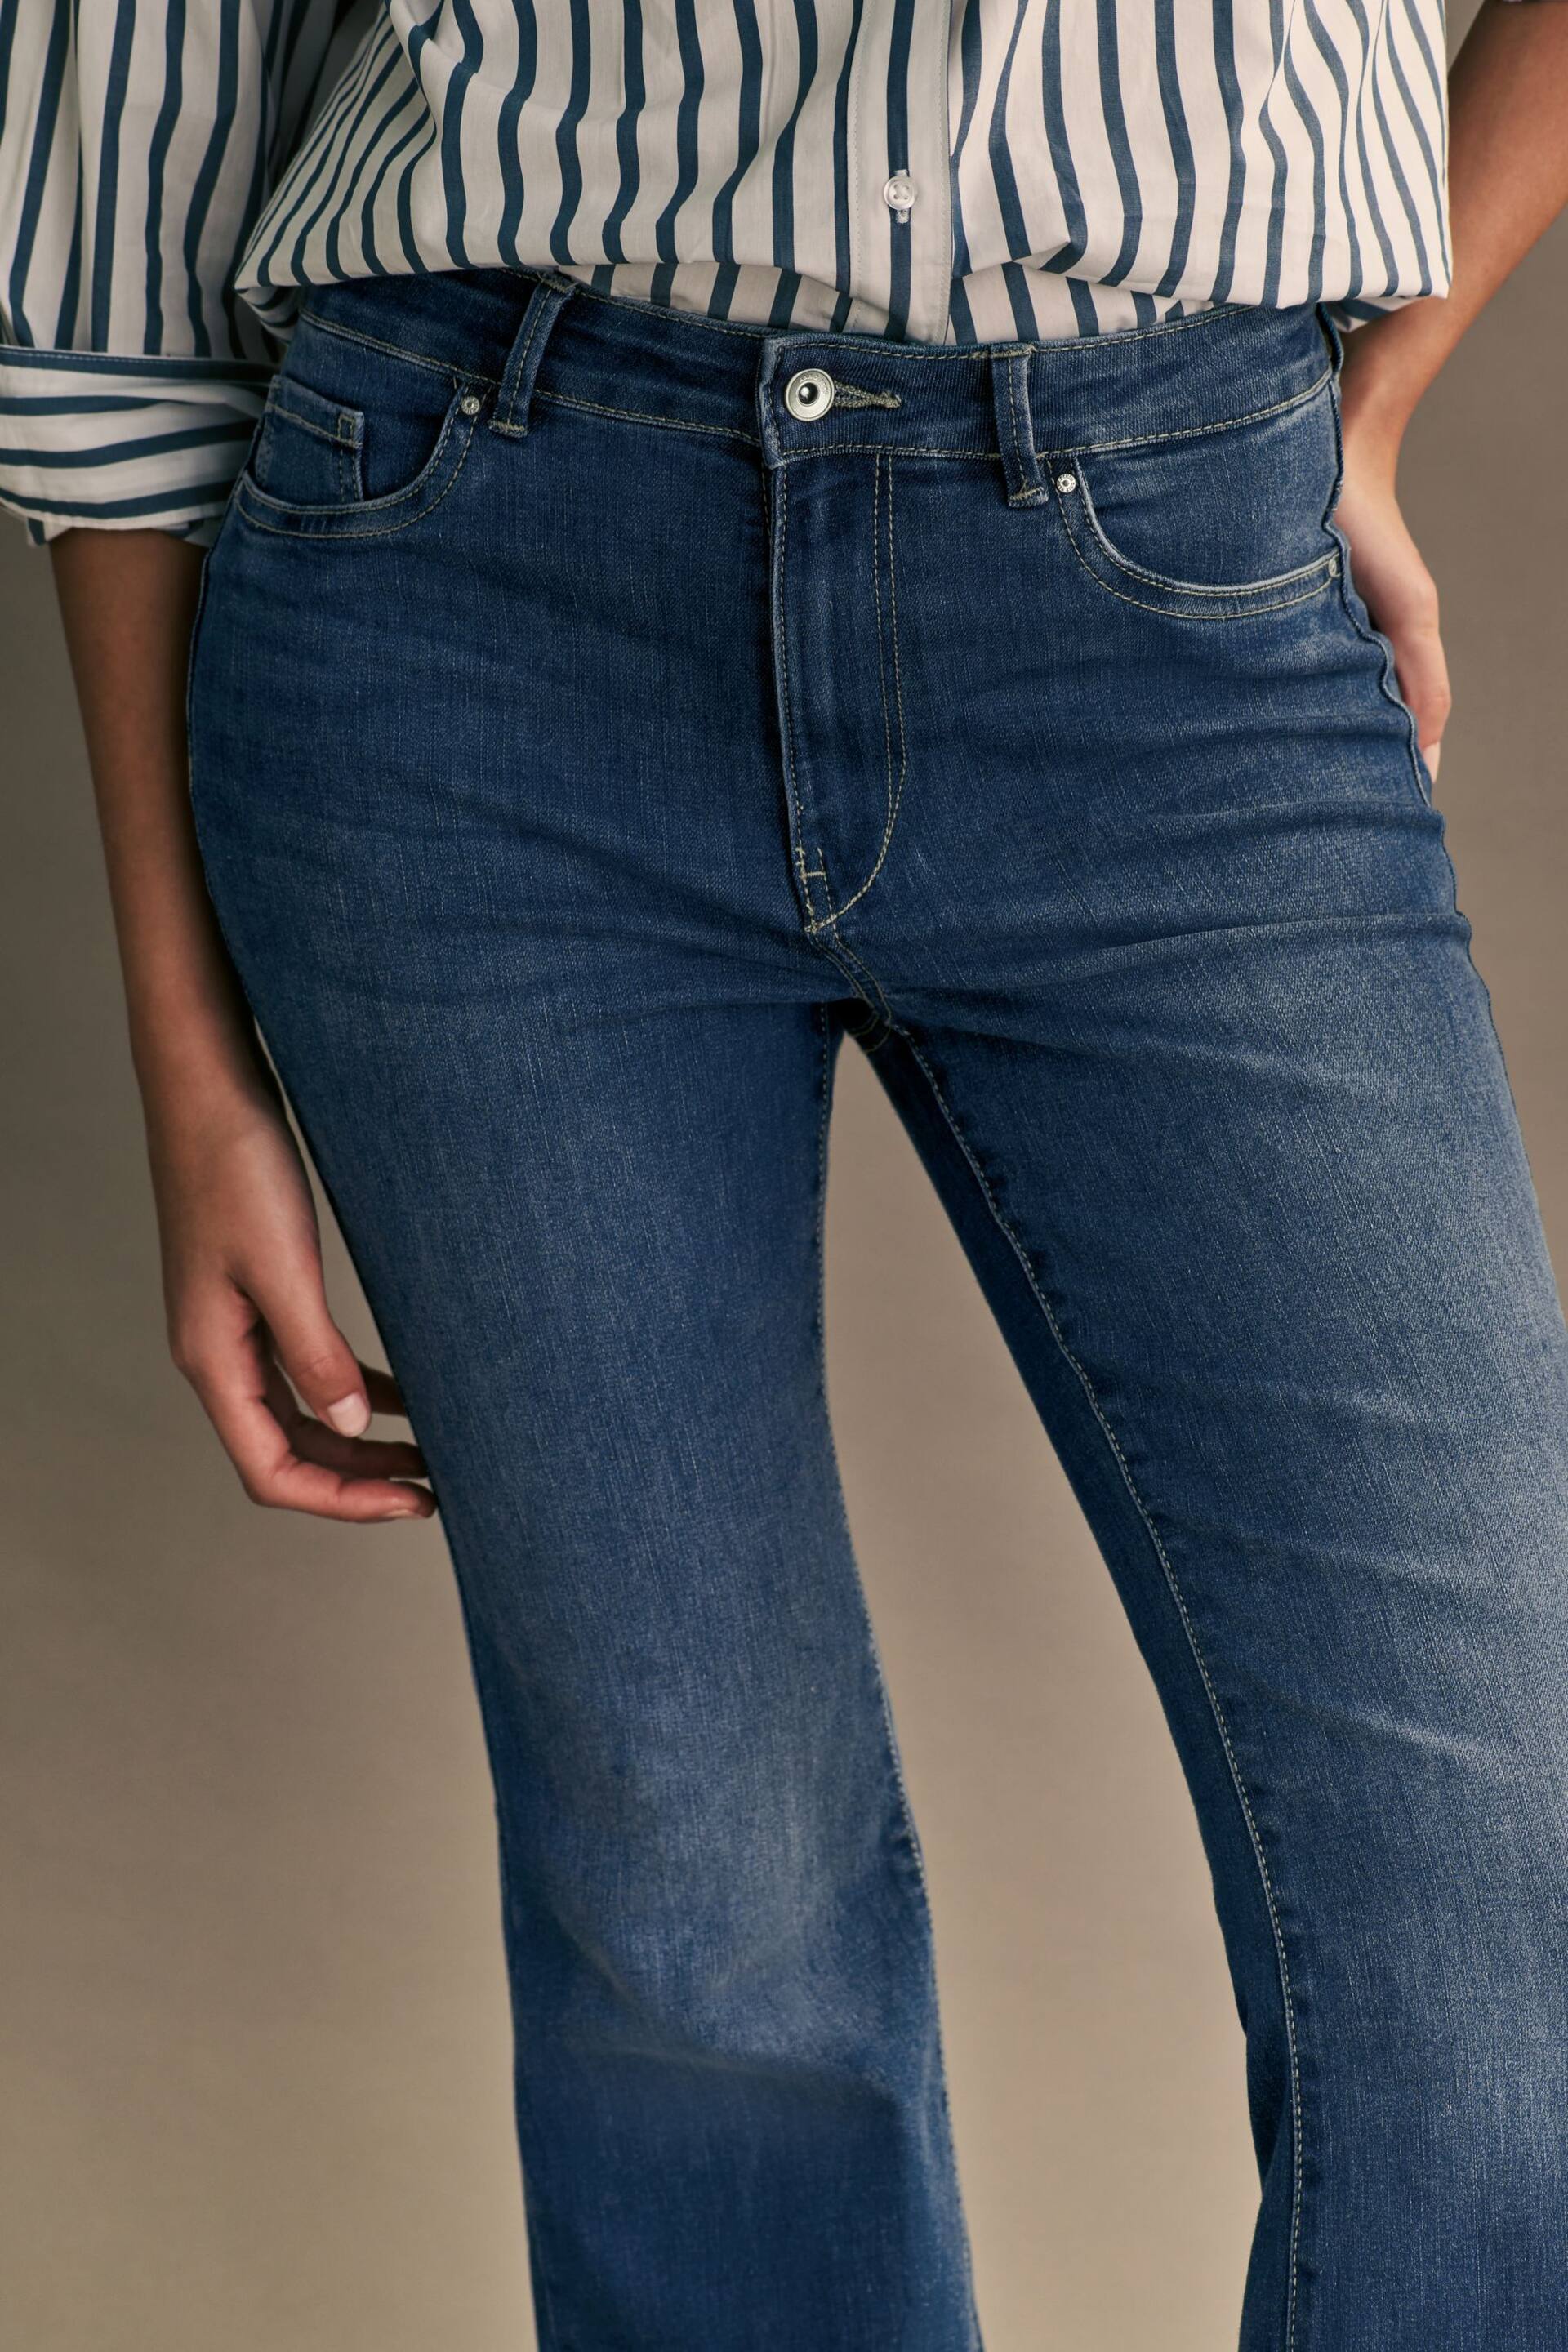 ONLY Blue High Waisted Flare Leg Rose Jeans - Image 5 of 8